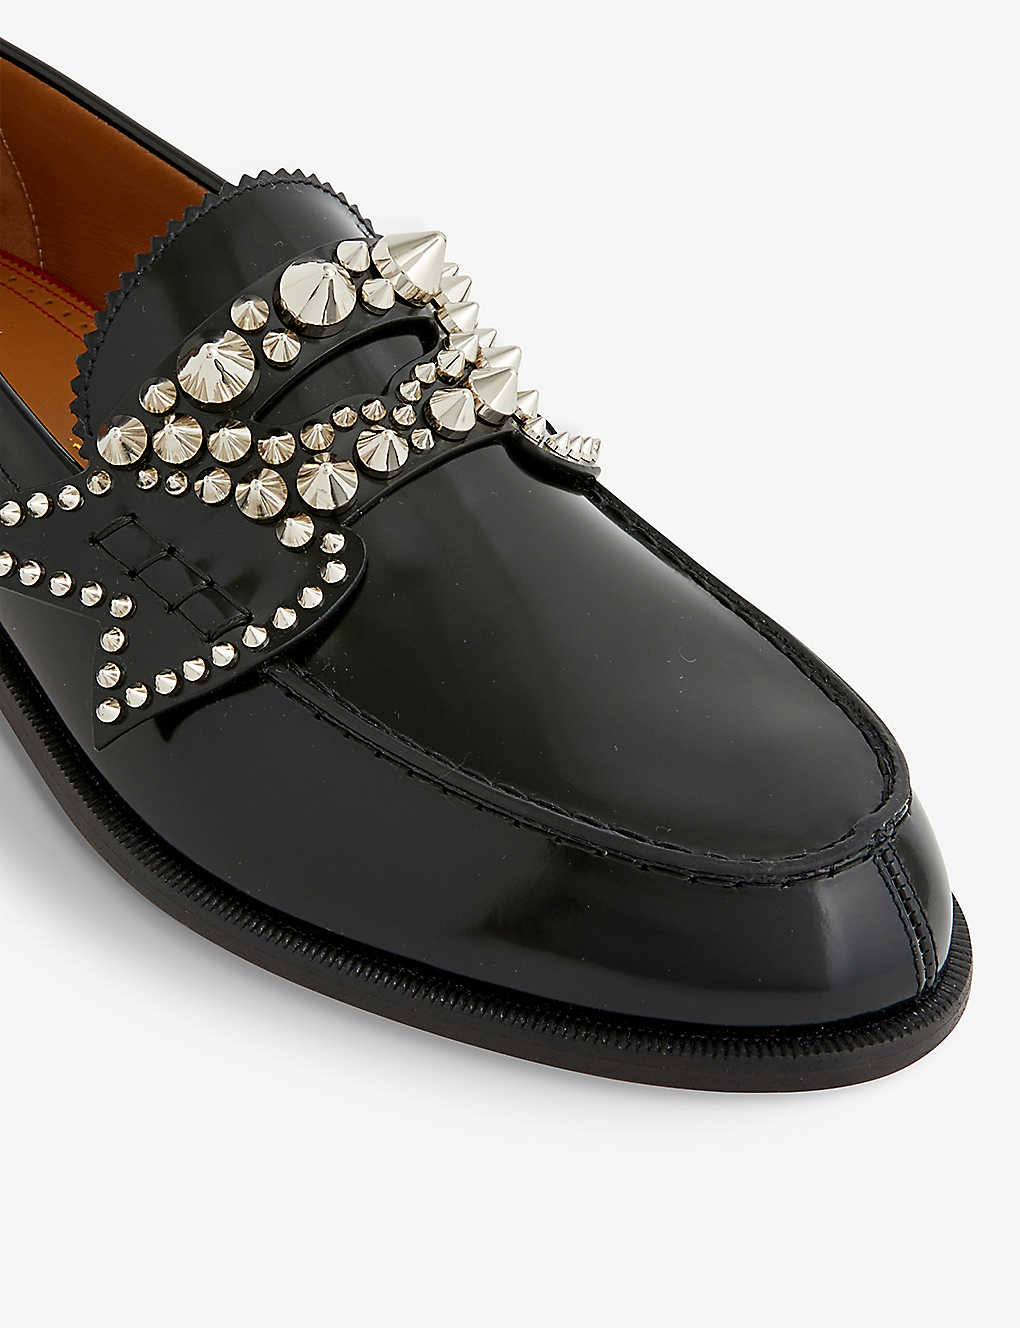 CHRISTIAN LOUBOUTIN No Penny stud-embellished leather loafers